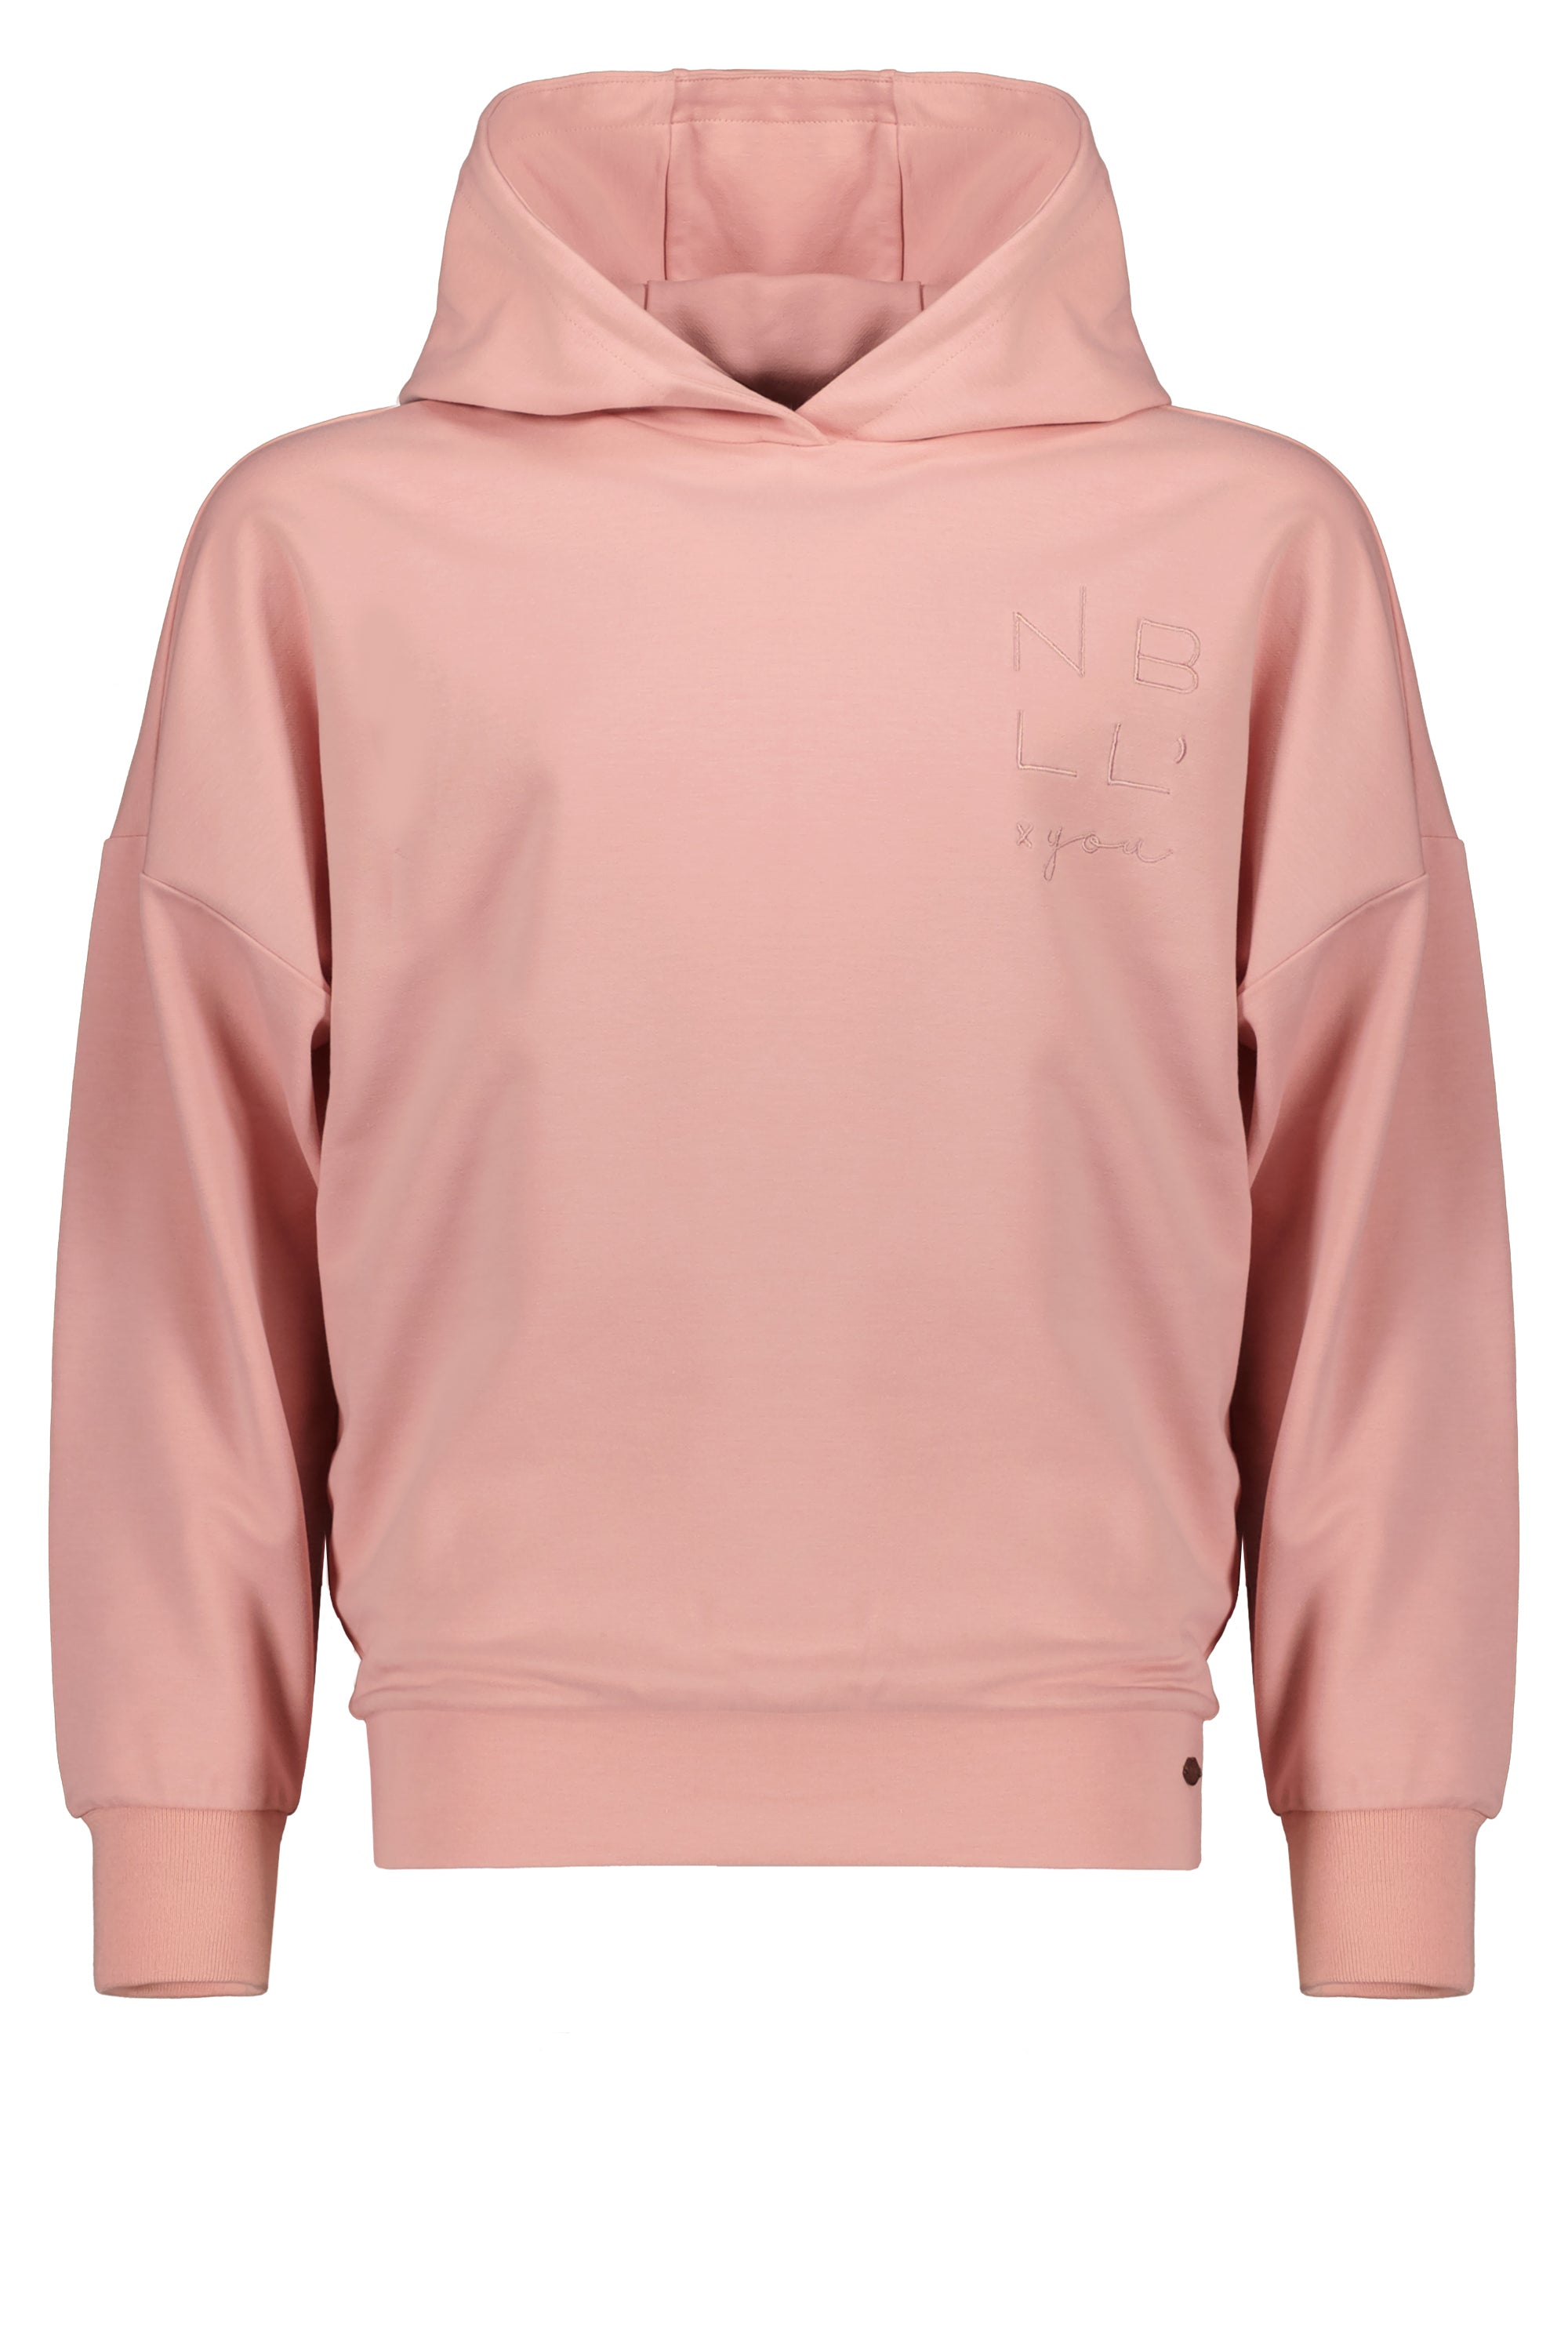 NoBell Kumy hooded sweat with peach finish: NBLL x you